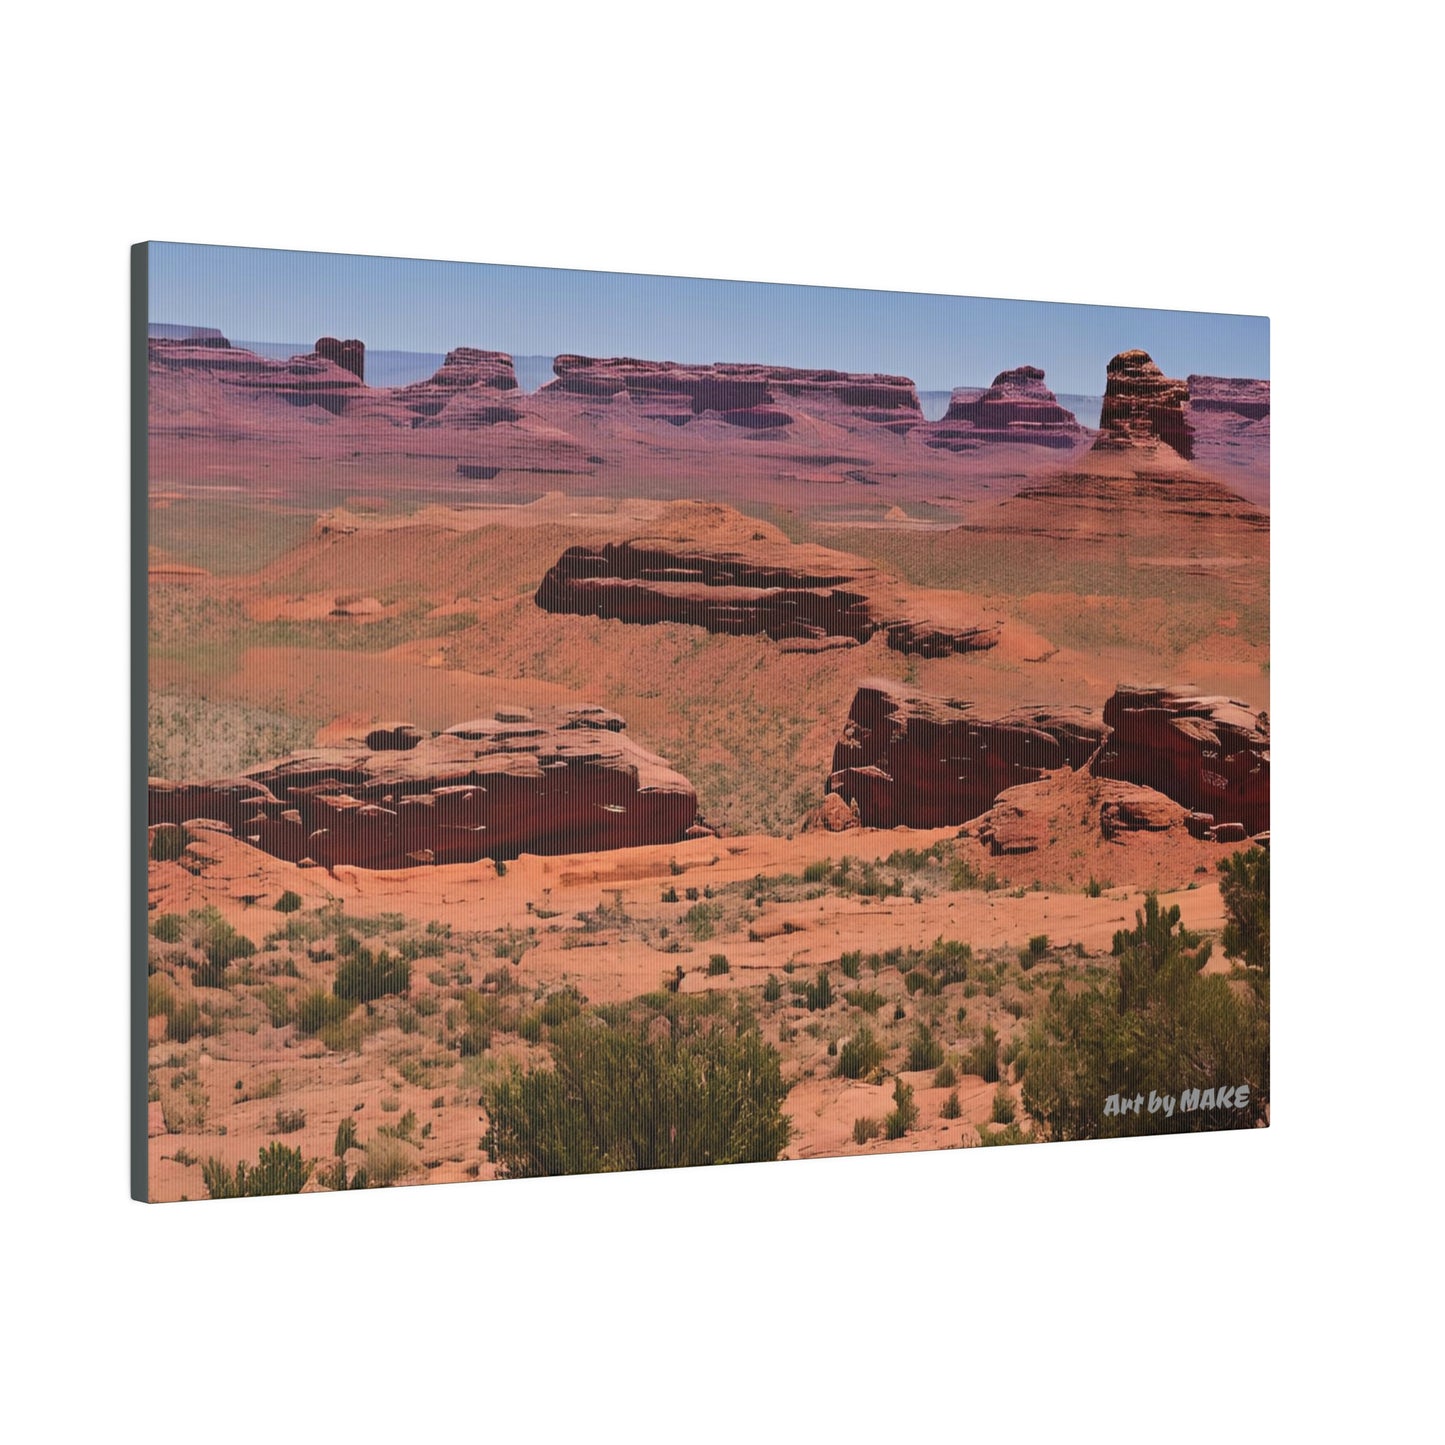 American Valley of the Gods 4 - 24"x16" Matte Canvas, Stretched, 0.75"